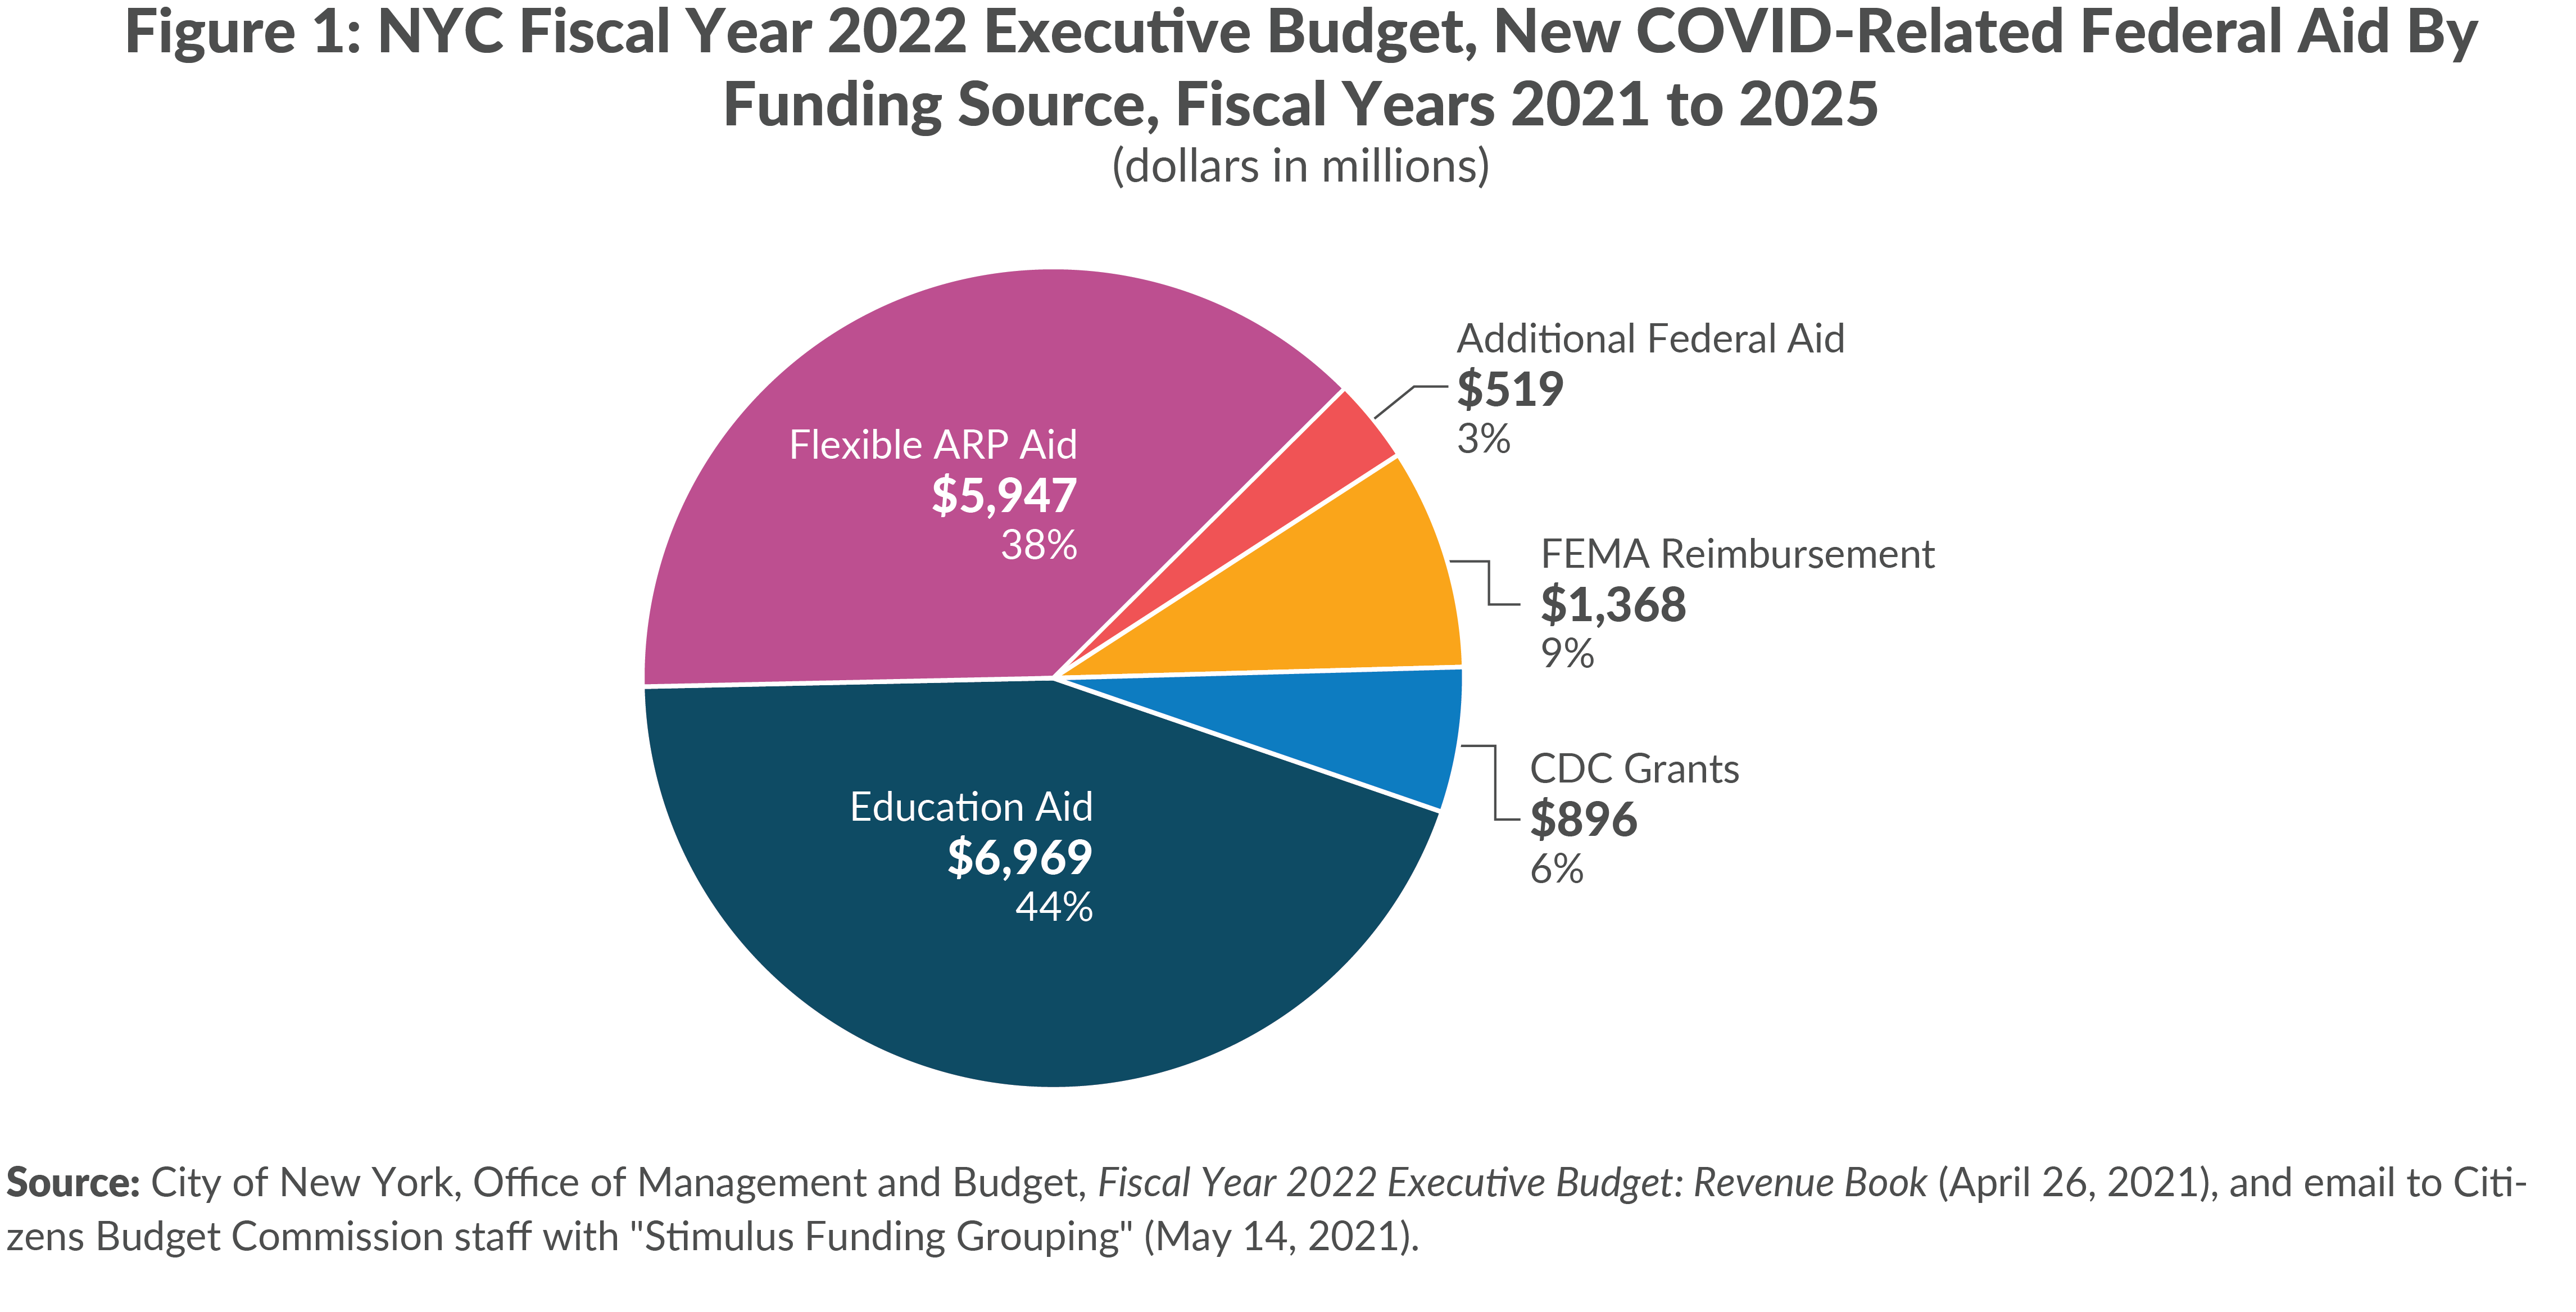 Figure 1: NYC Fiscal Year 2022 Executive Budget, New COVID-Related Federal Aid By Funding Source, FY2021-2025